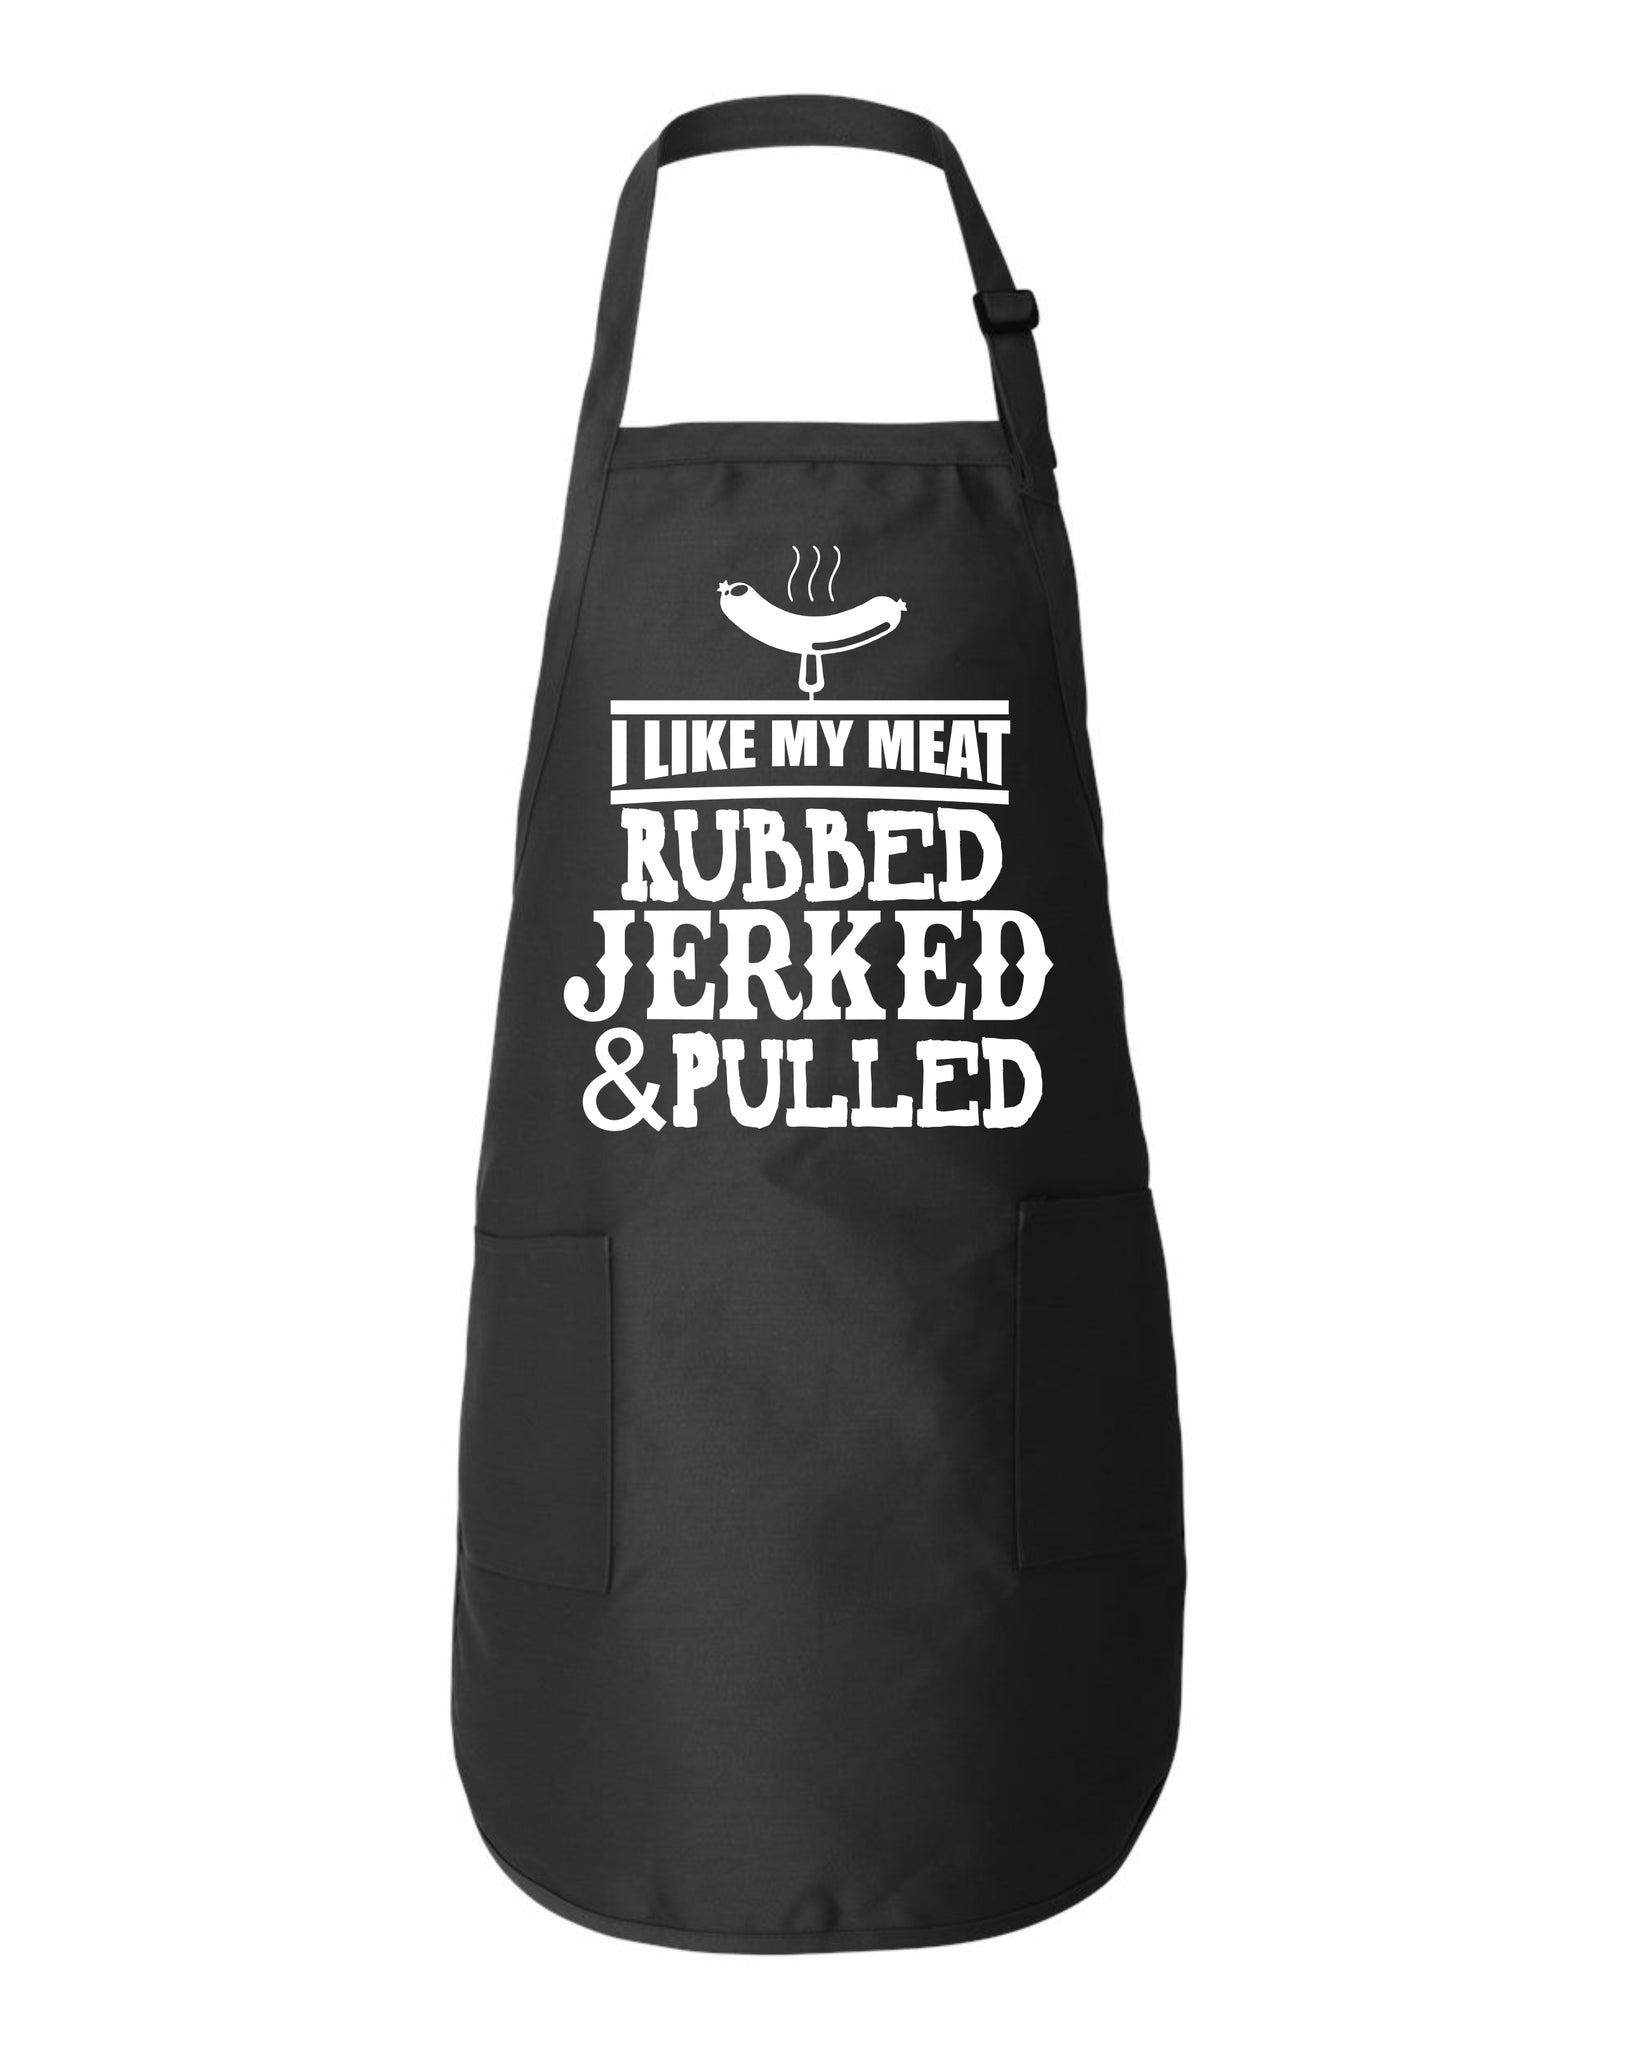 I like my meat Rubbed, Jerked, and Pulled Funny Kitchen Apron BBQ Funny Gift Father's Day Mother's Day